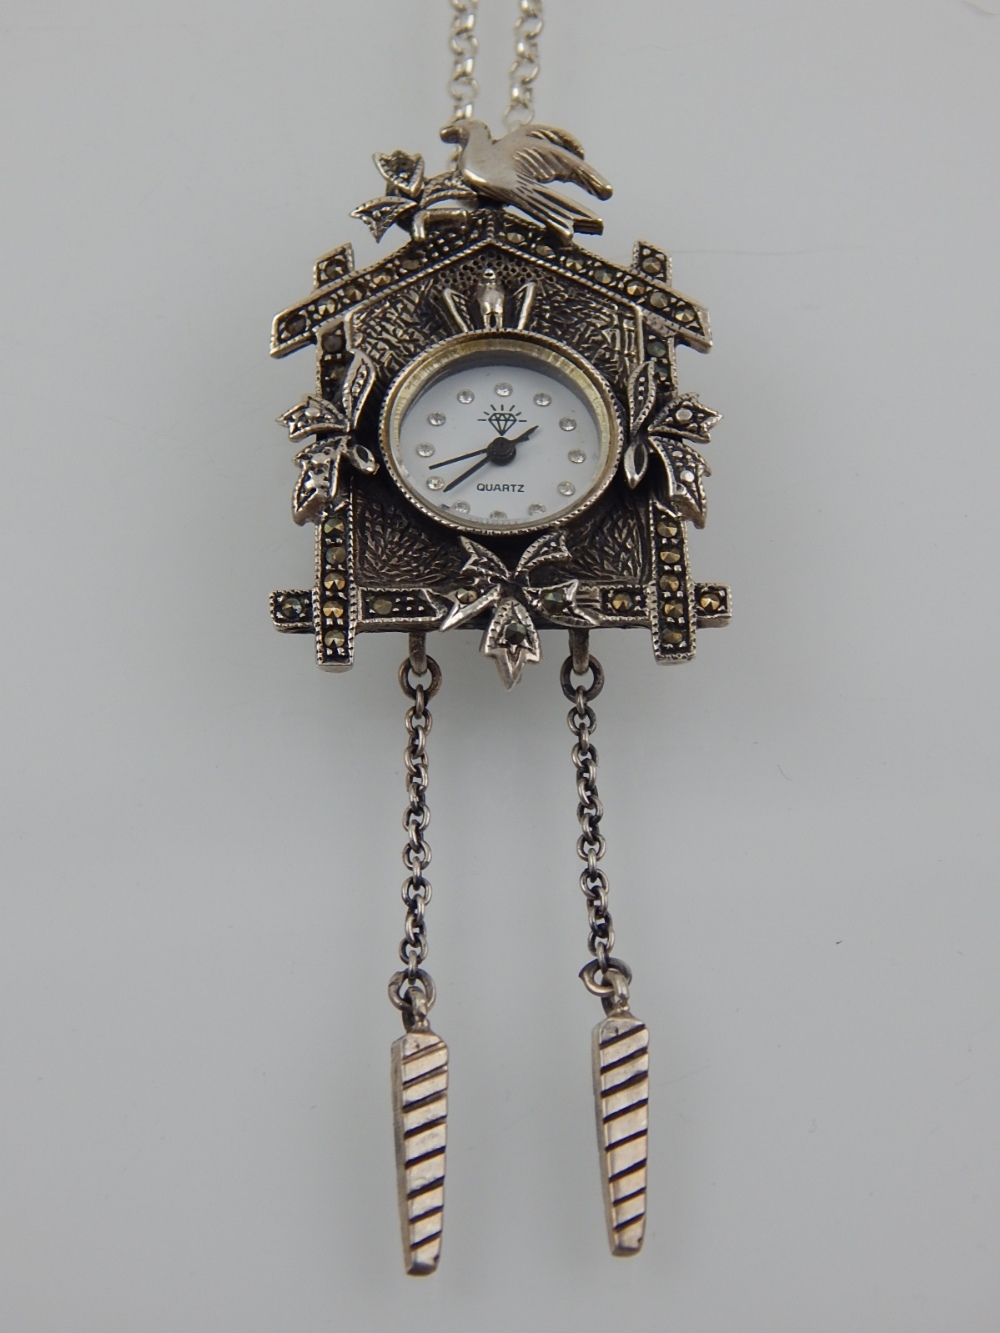 A silver quartz clock pendant, suspended on a silver chain, stamped 925.